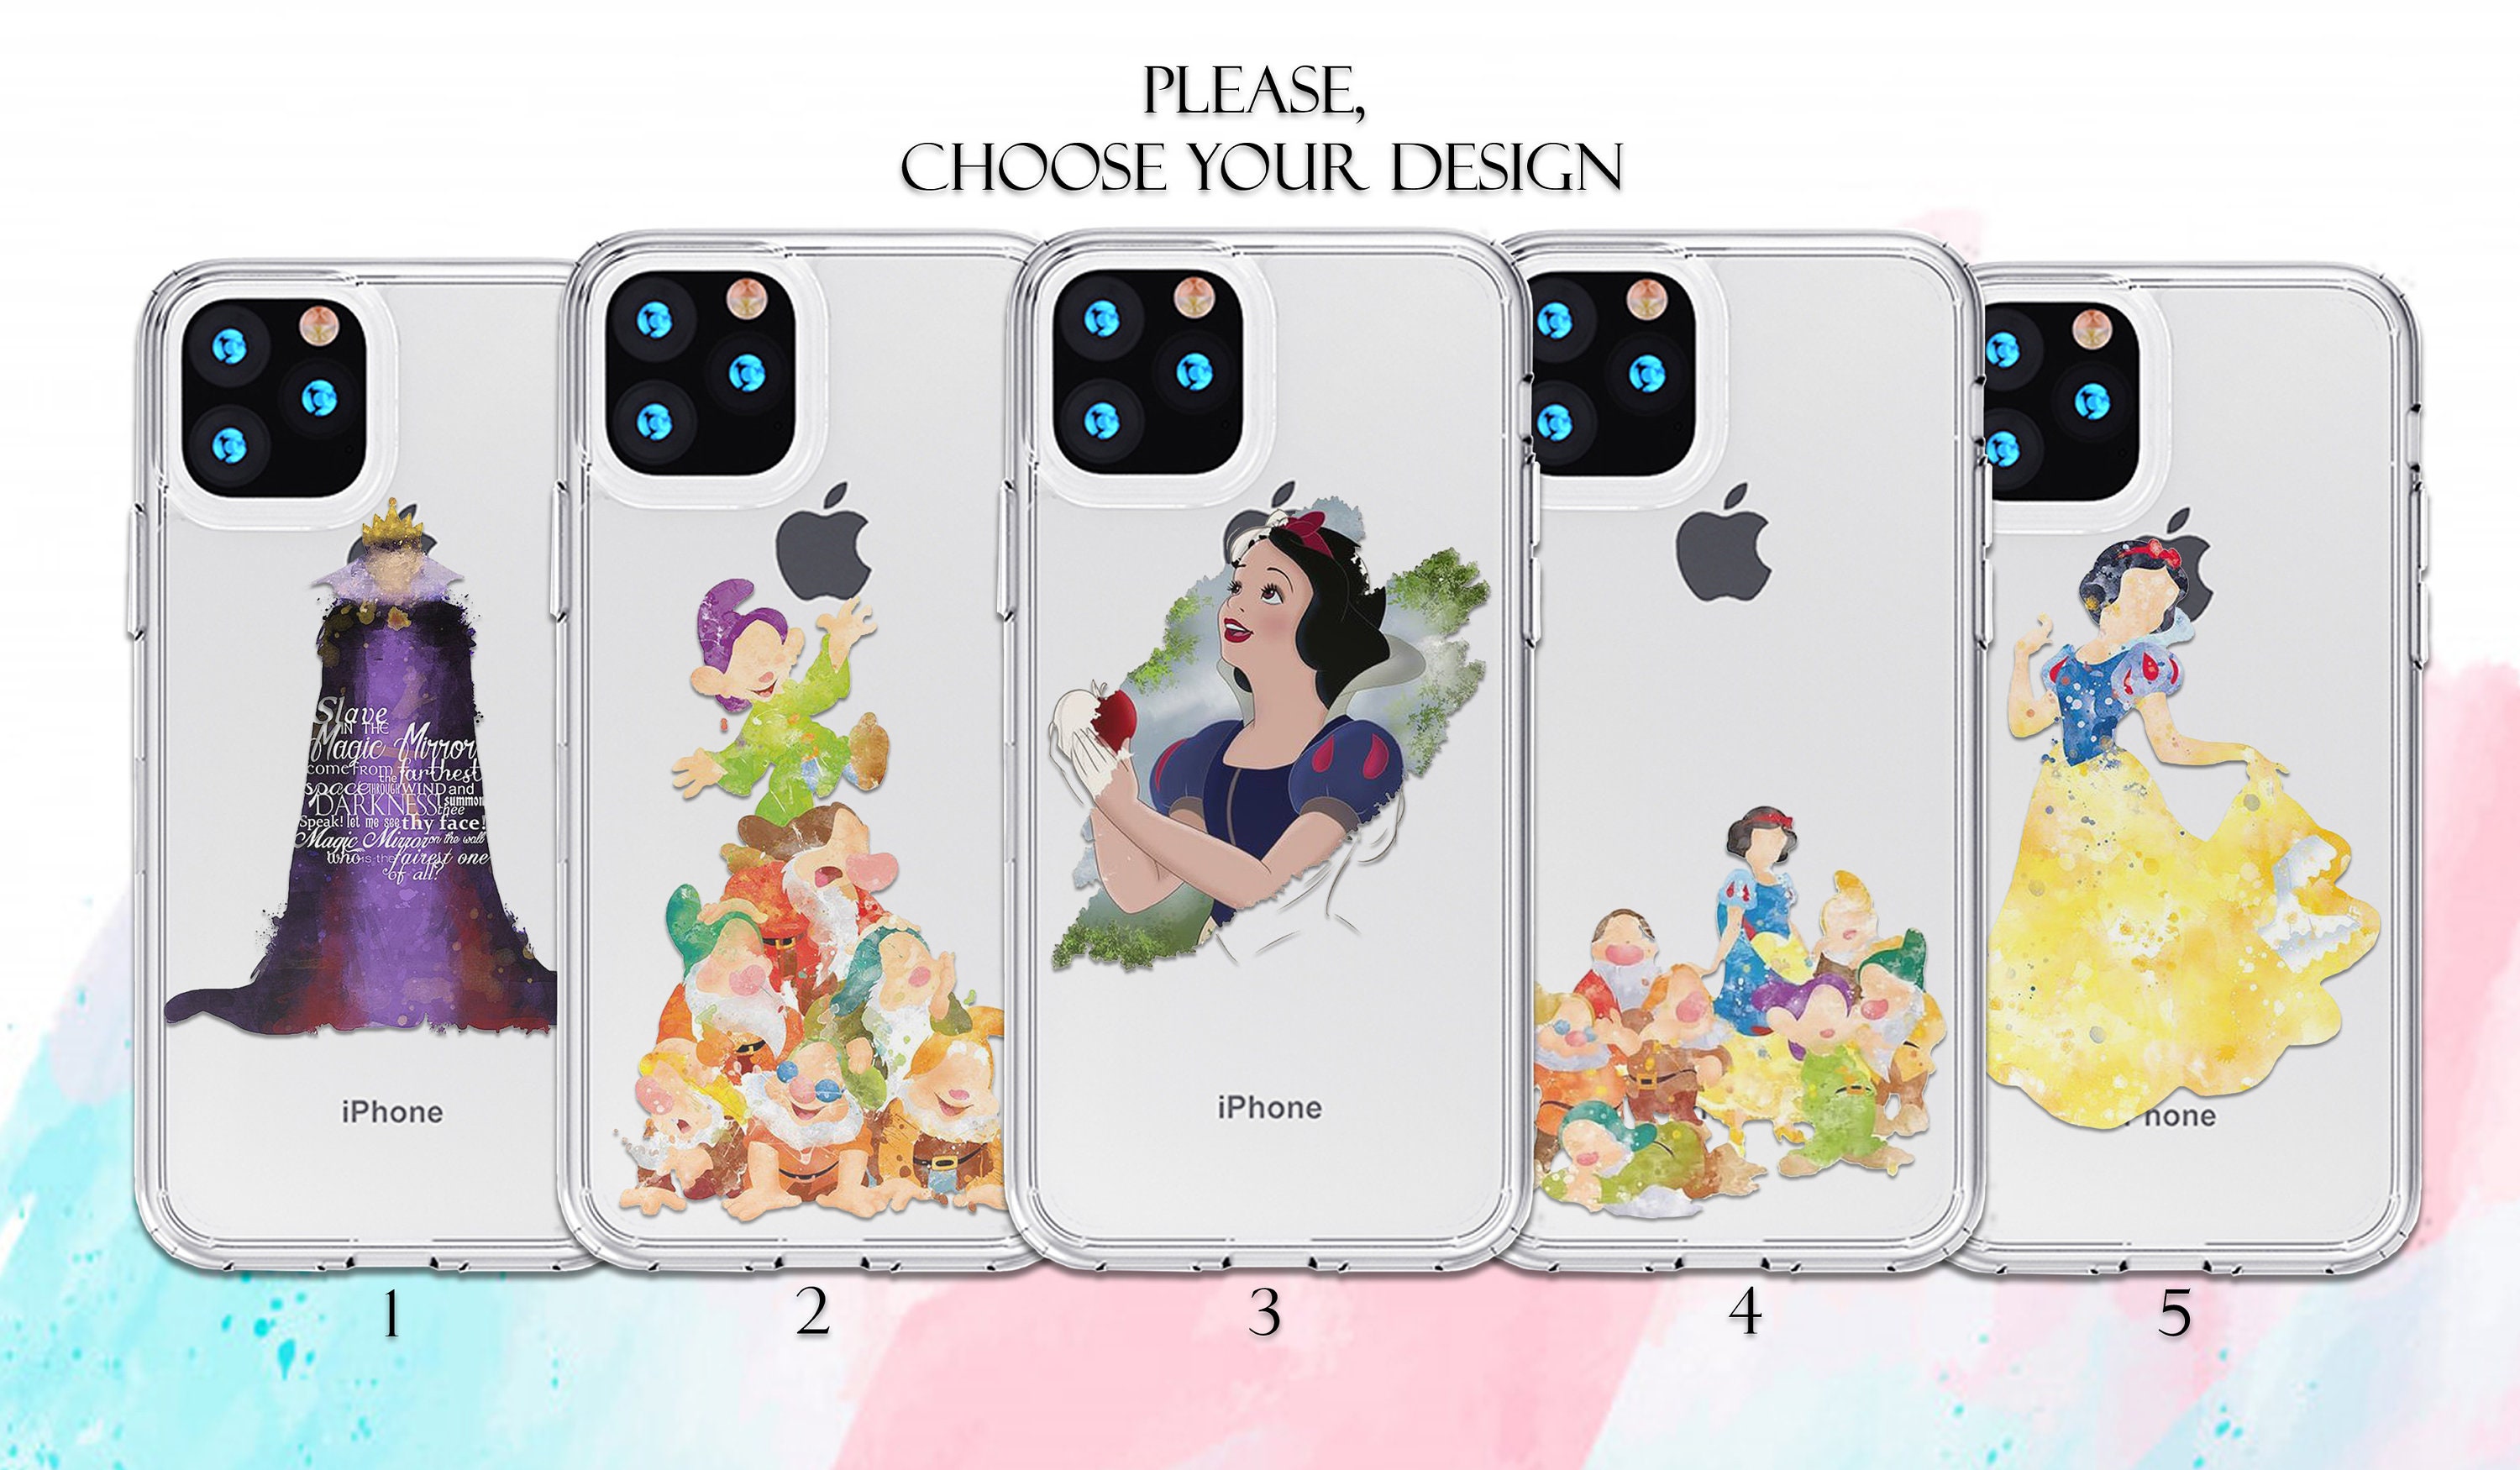 Summon iPhone Cases for Sale